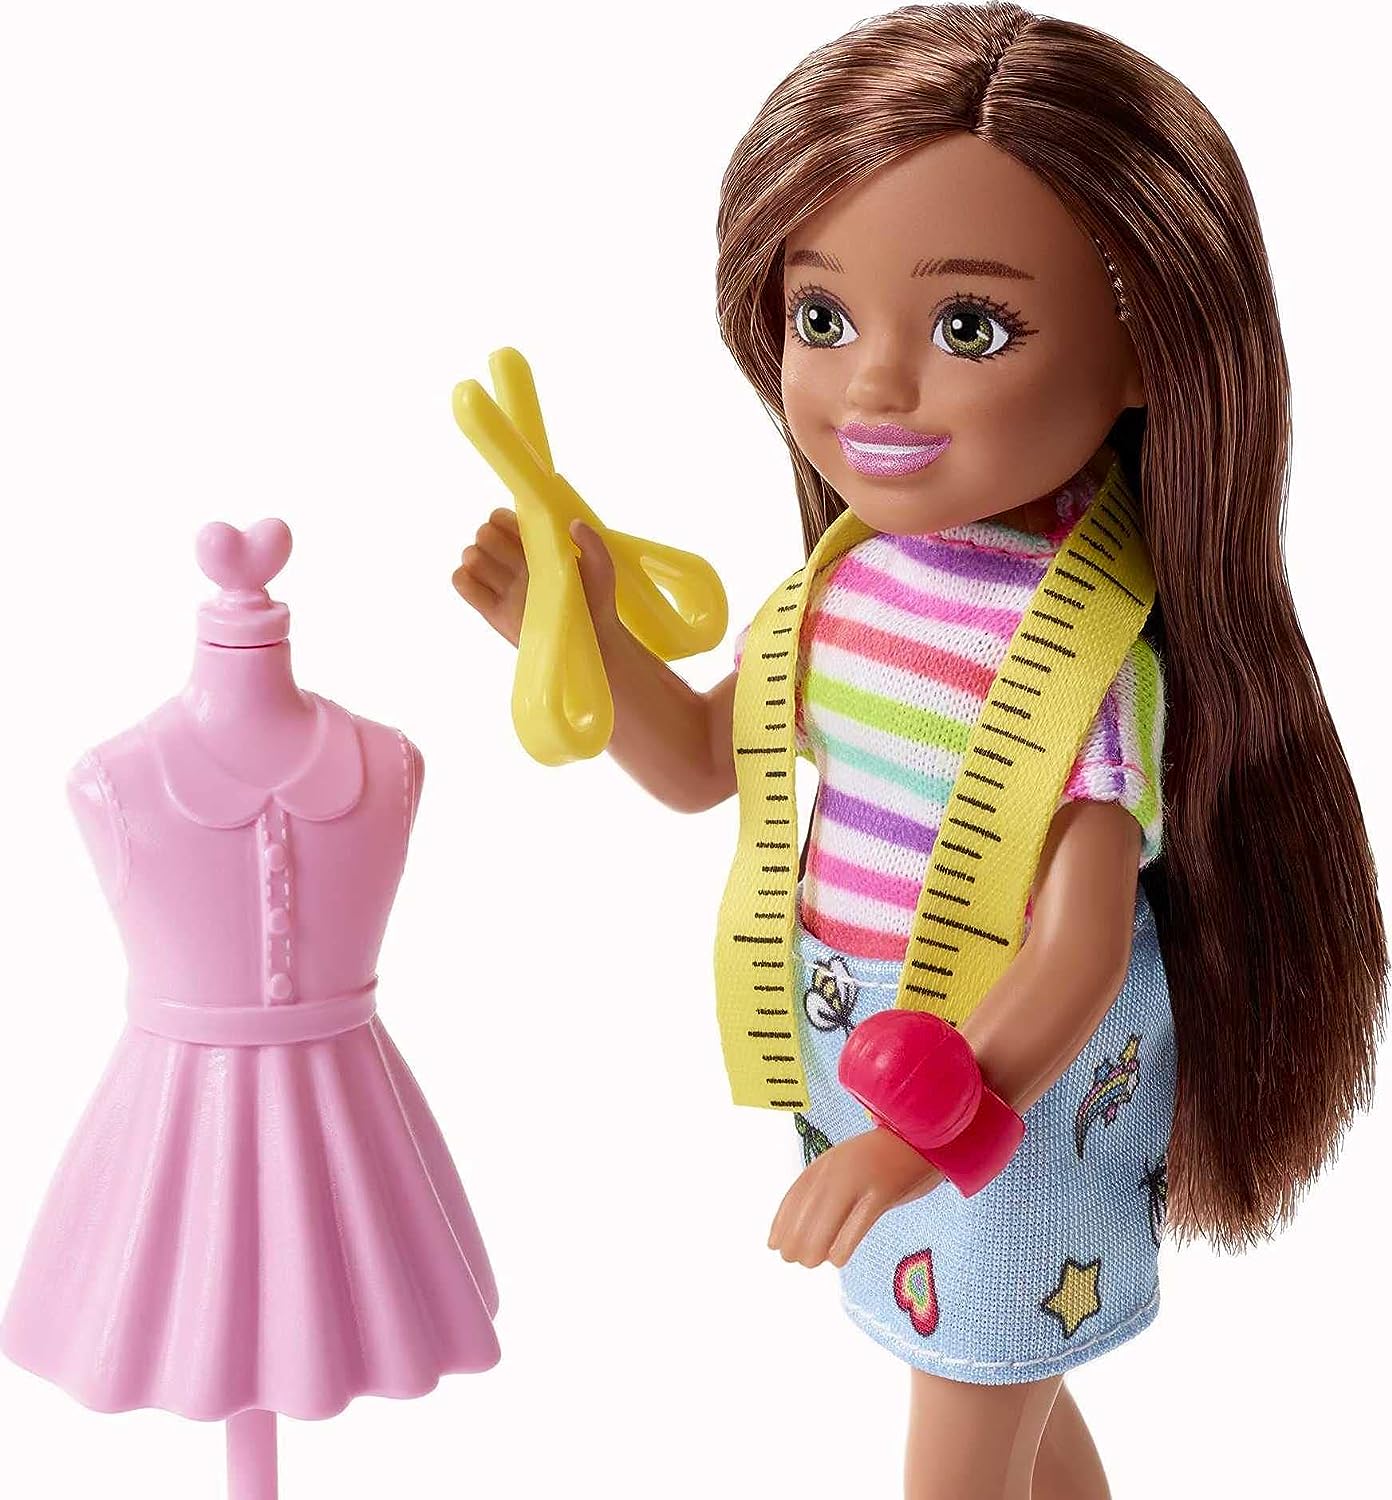 Barbie Chelsea Can Be 6 Inch Brunette Chelsea Fashion Designer Doll Playset for Ages 3 Years Old & Up